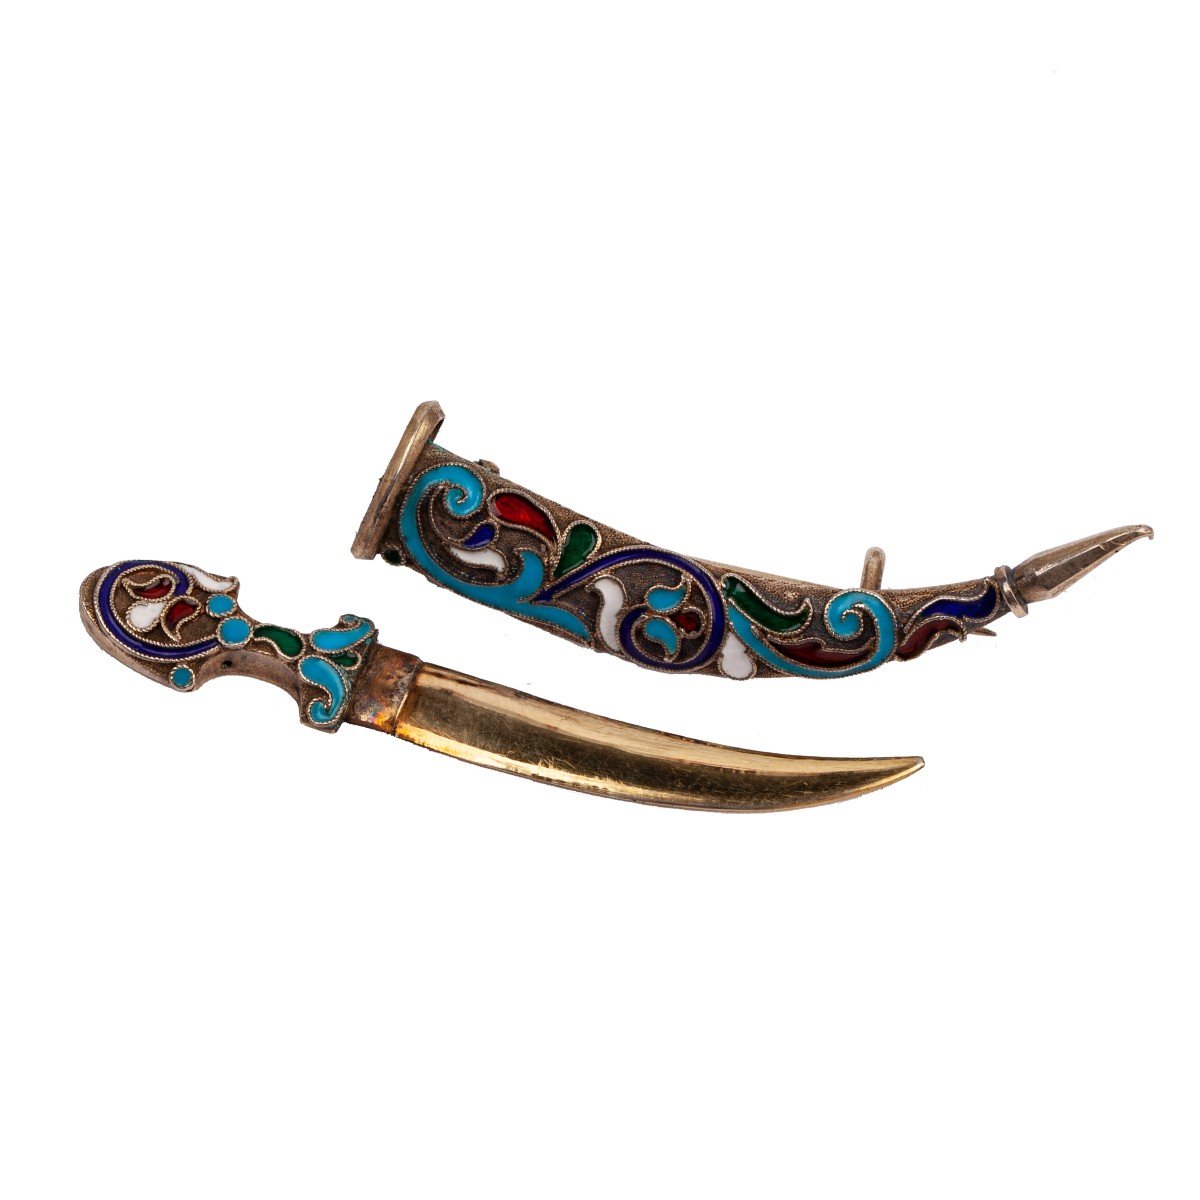 A Silver And Cloisonné Enamel Brooch From The Russian Imperial Period In The Shape Of A Kindjal.-photo-3